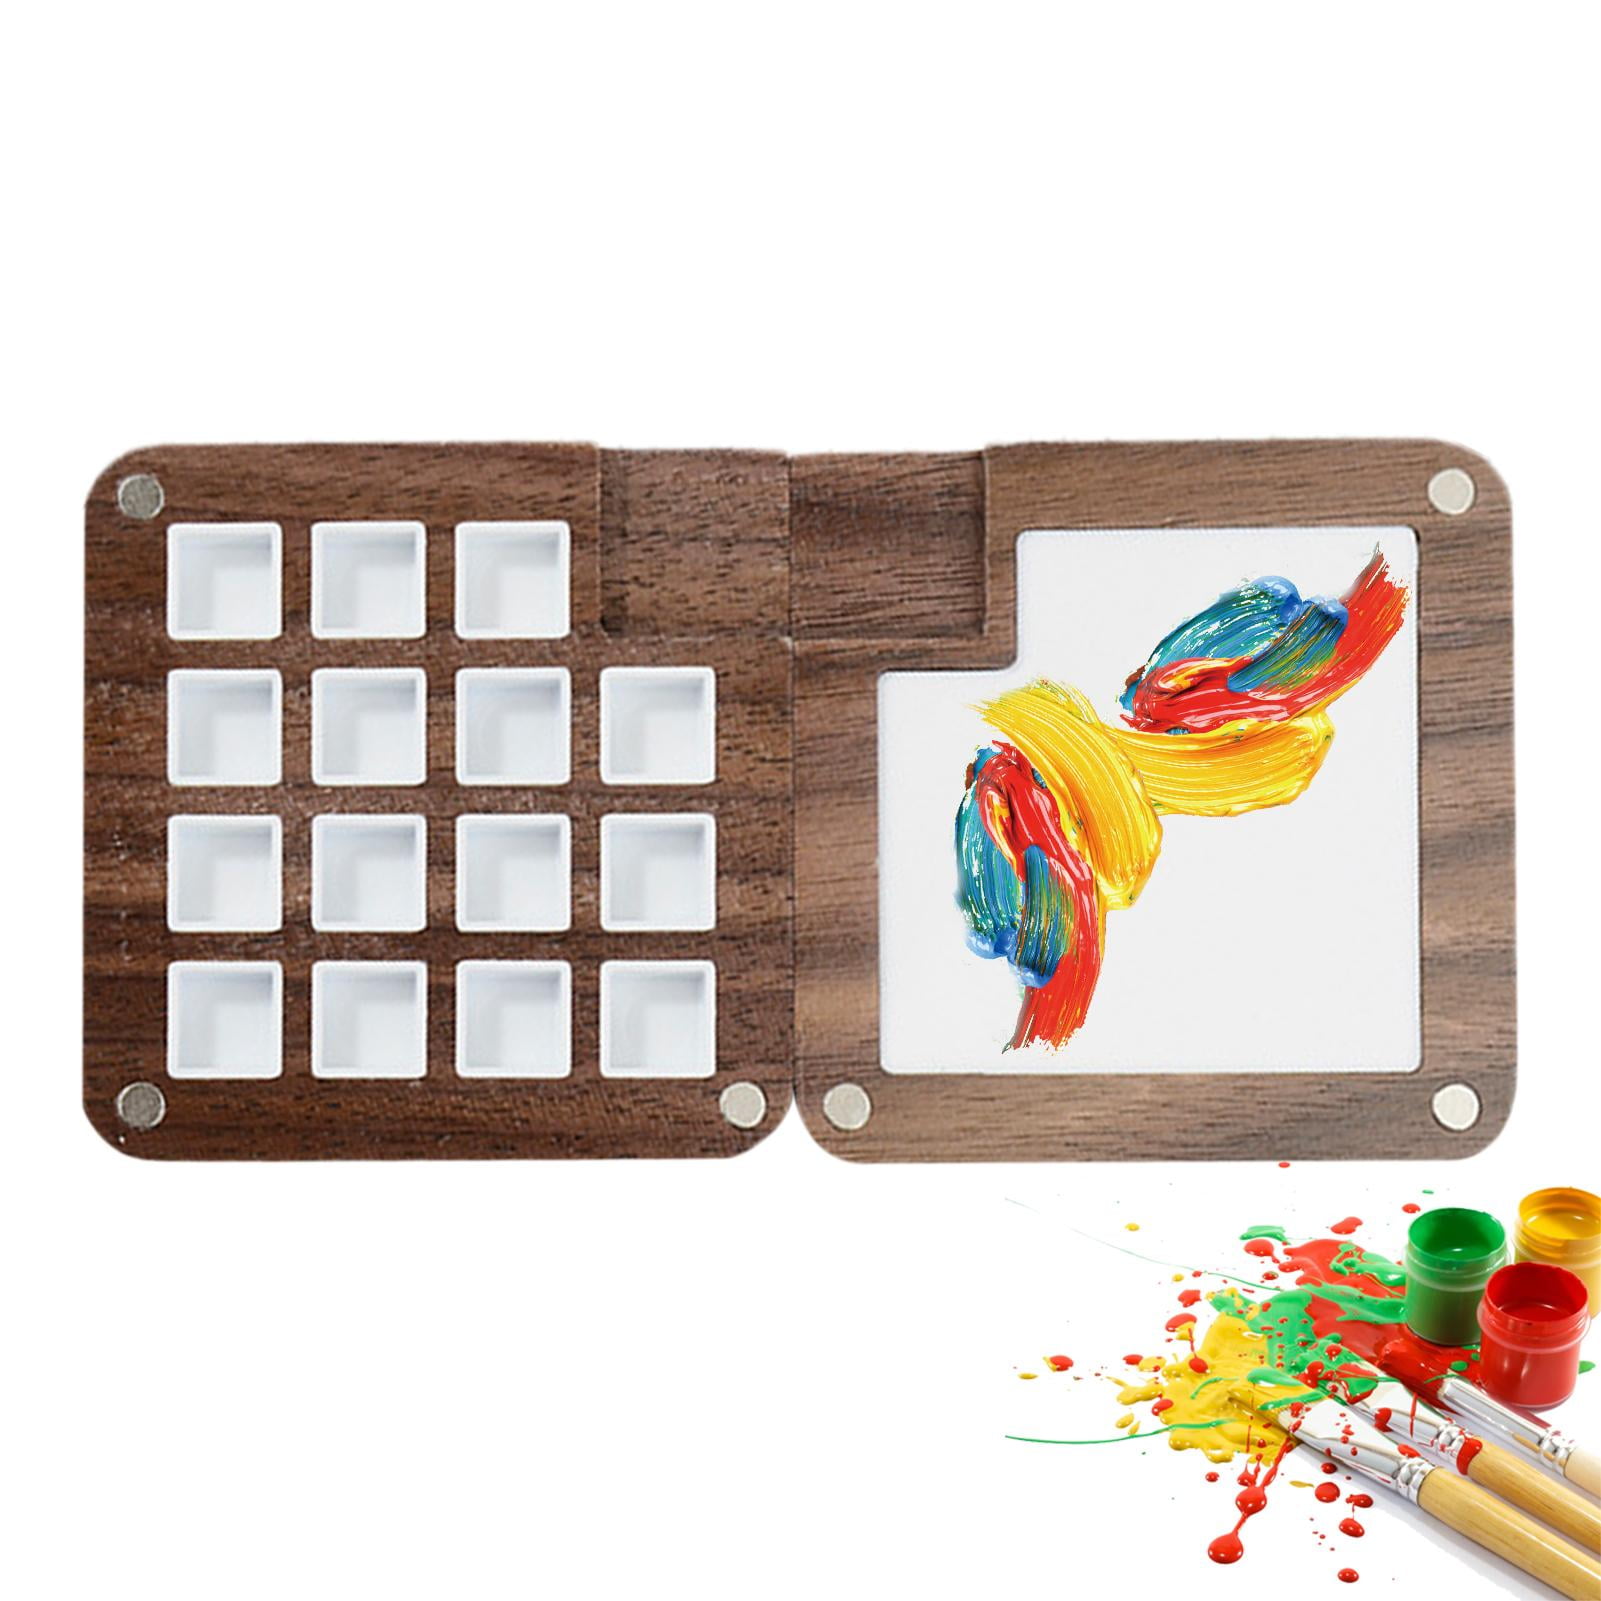 HINZIC Portable Watercolor Palette 15 Grids Wooden Mini Paint Palette with Lid and Mixing Tray Travel Sketchbook Palette Box for Watercolor Acrylic